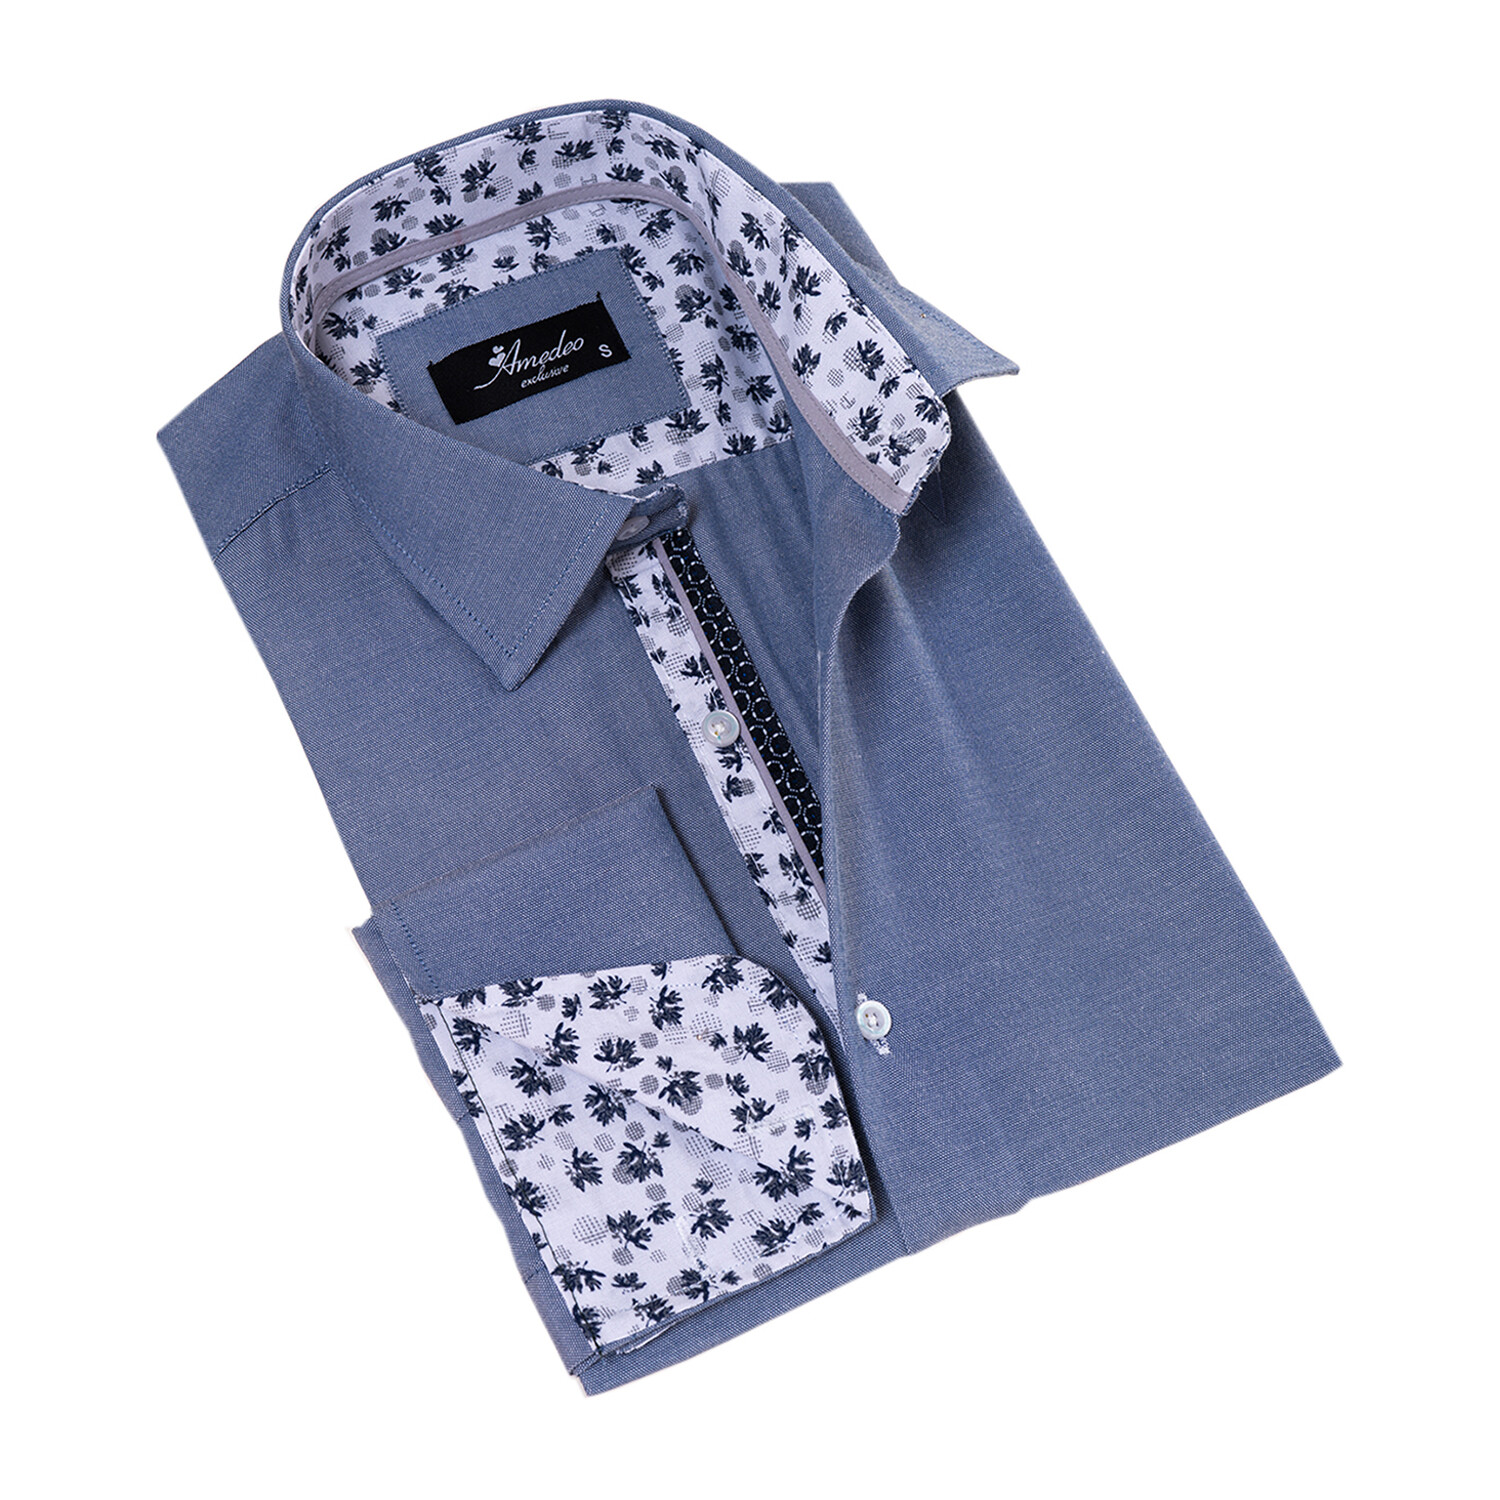 Reversible French Cuff Dress Shirt // Gray Floral Lined (L) - Amedeo ...